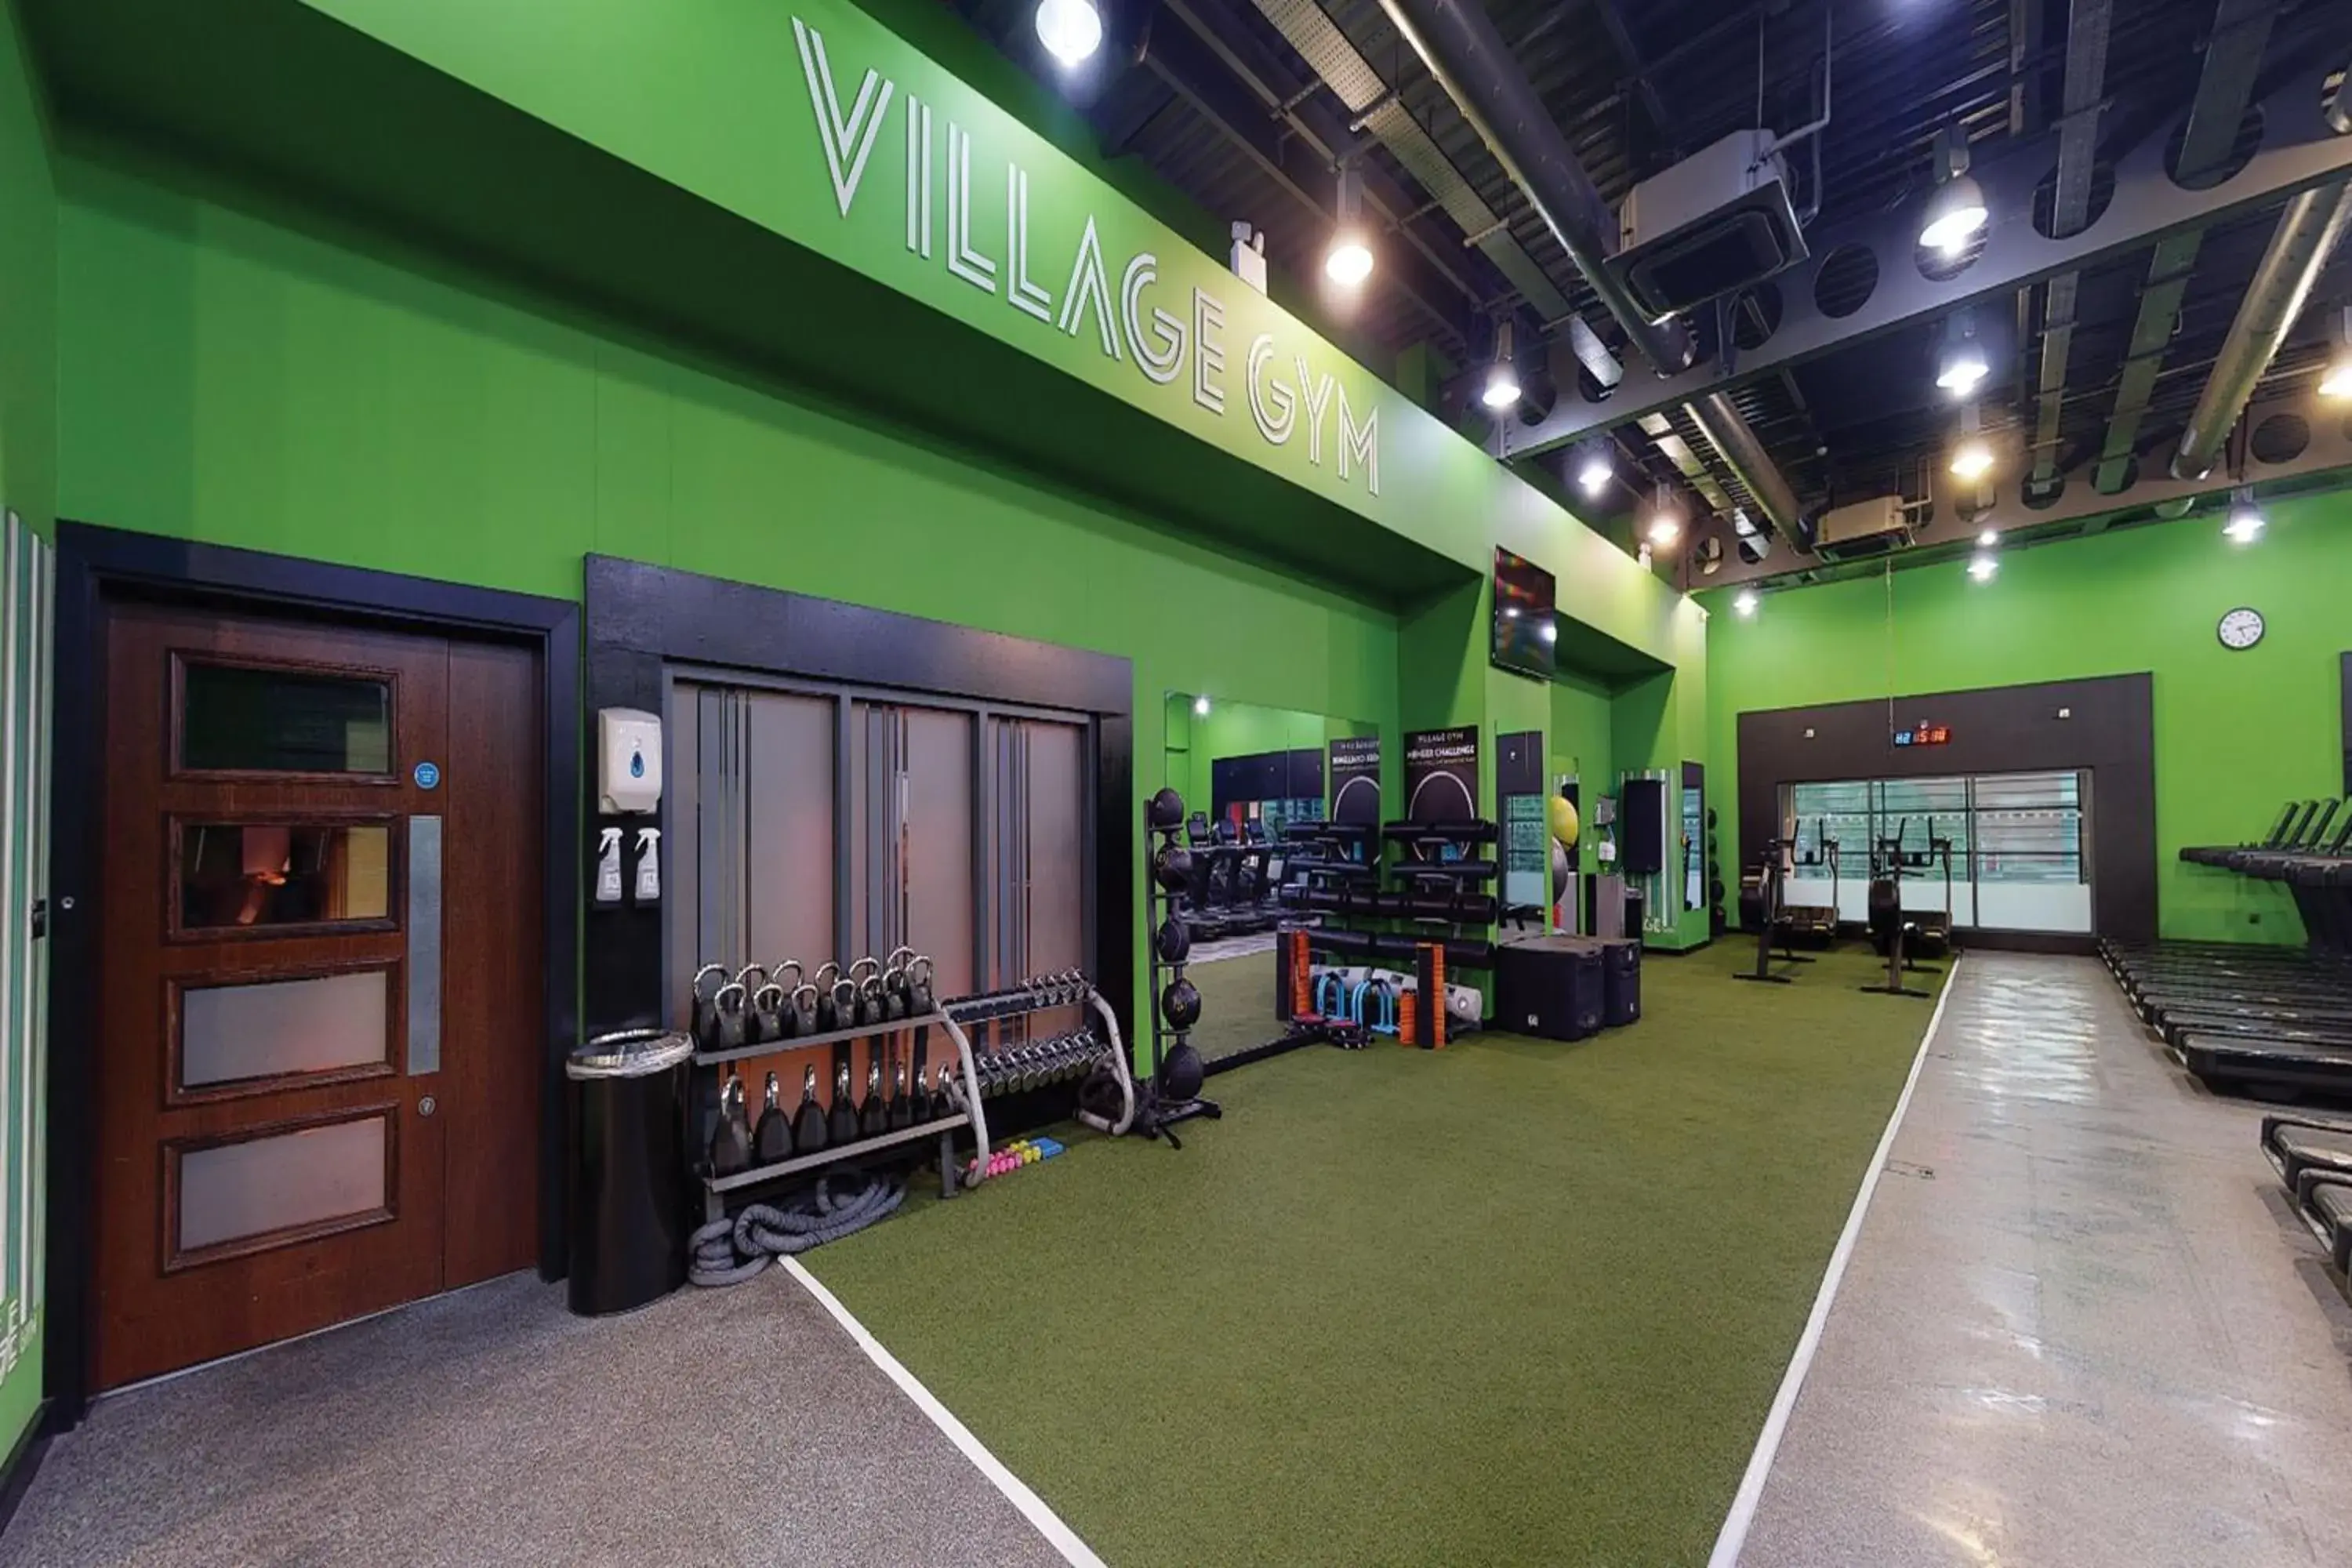 Fitness centre/facilities in Village Hotel Solihull